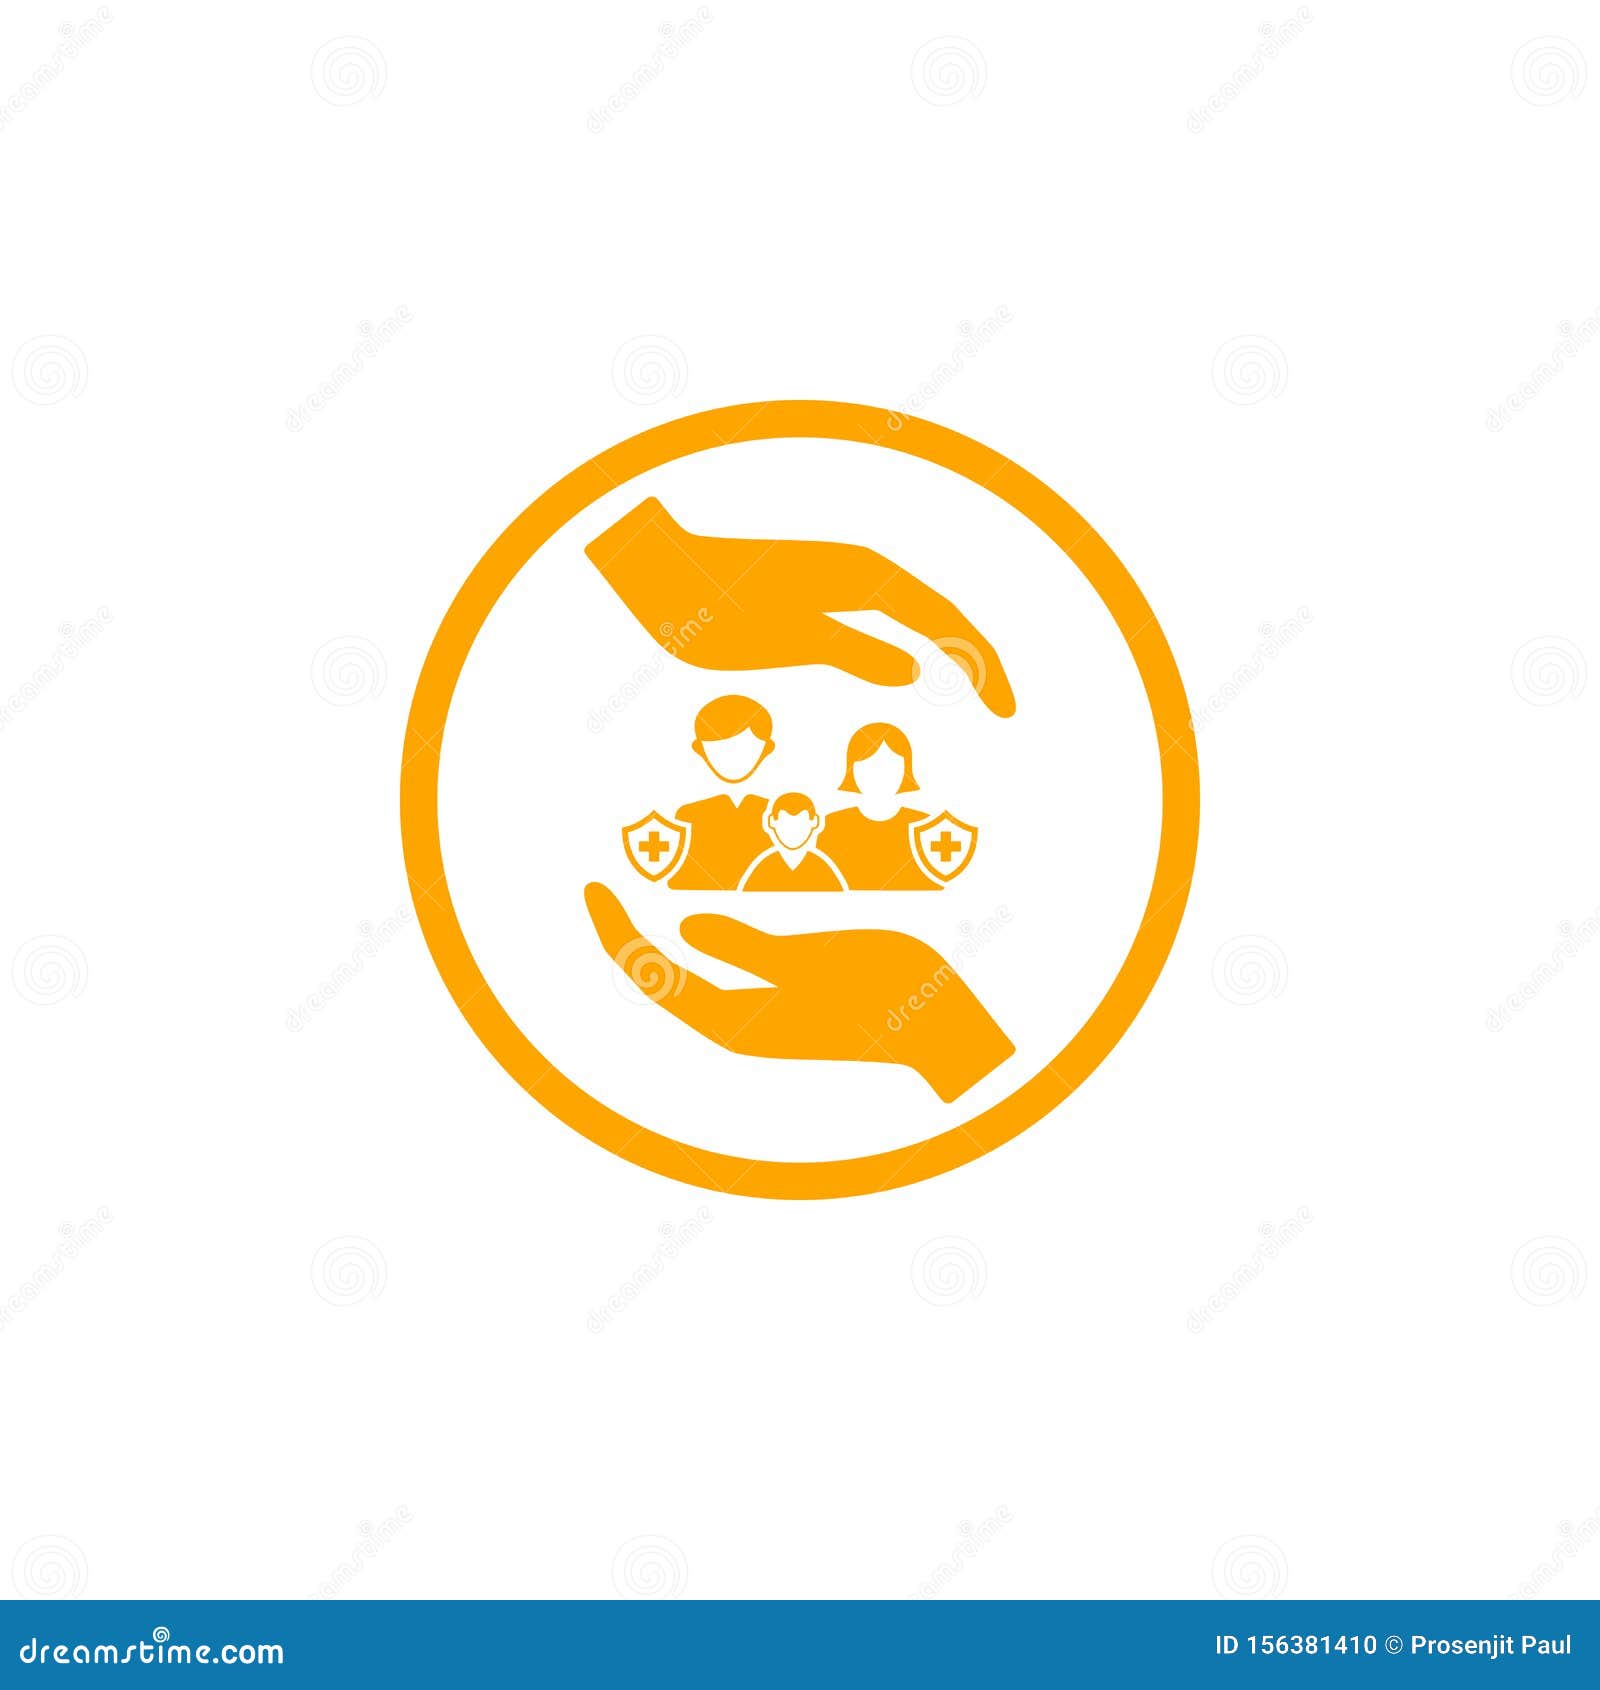 Insurance Business Protection Crops Insurance Life And Family Insurance Orange Color Icon Stock Illustration Illustration Of Umbrella Health 156381410